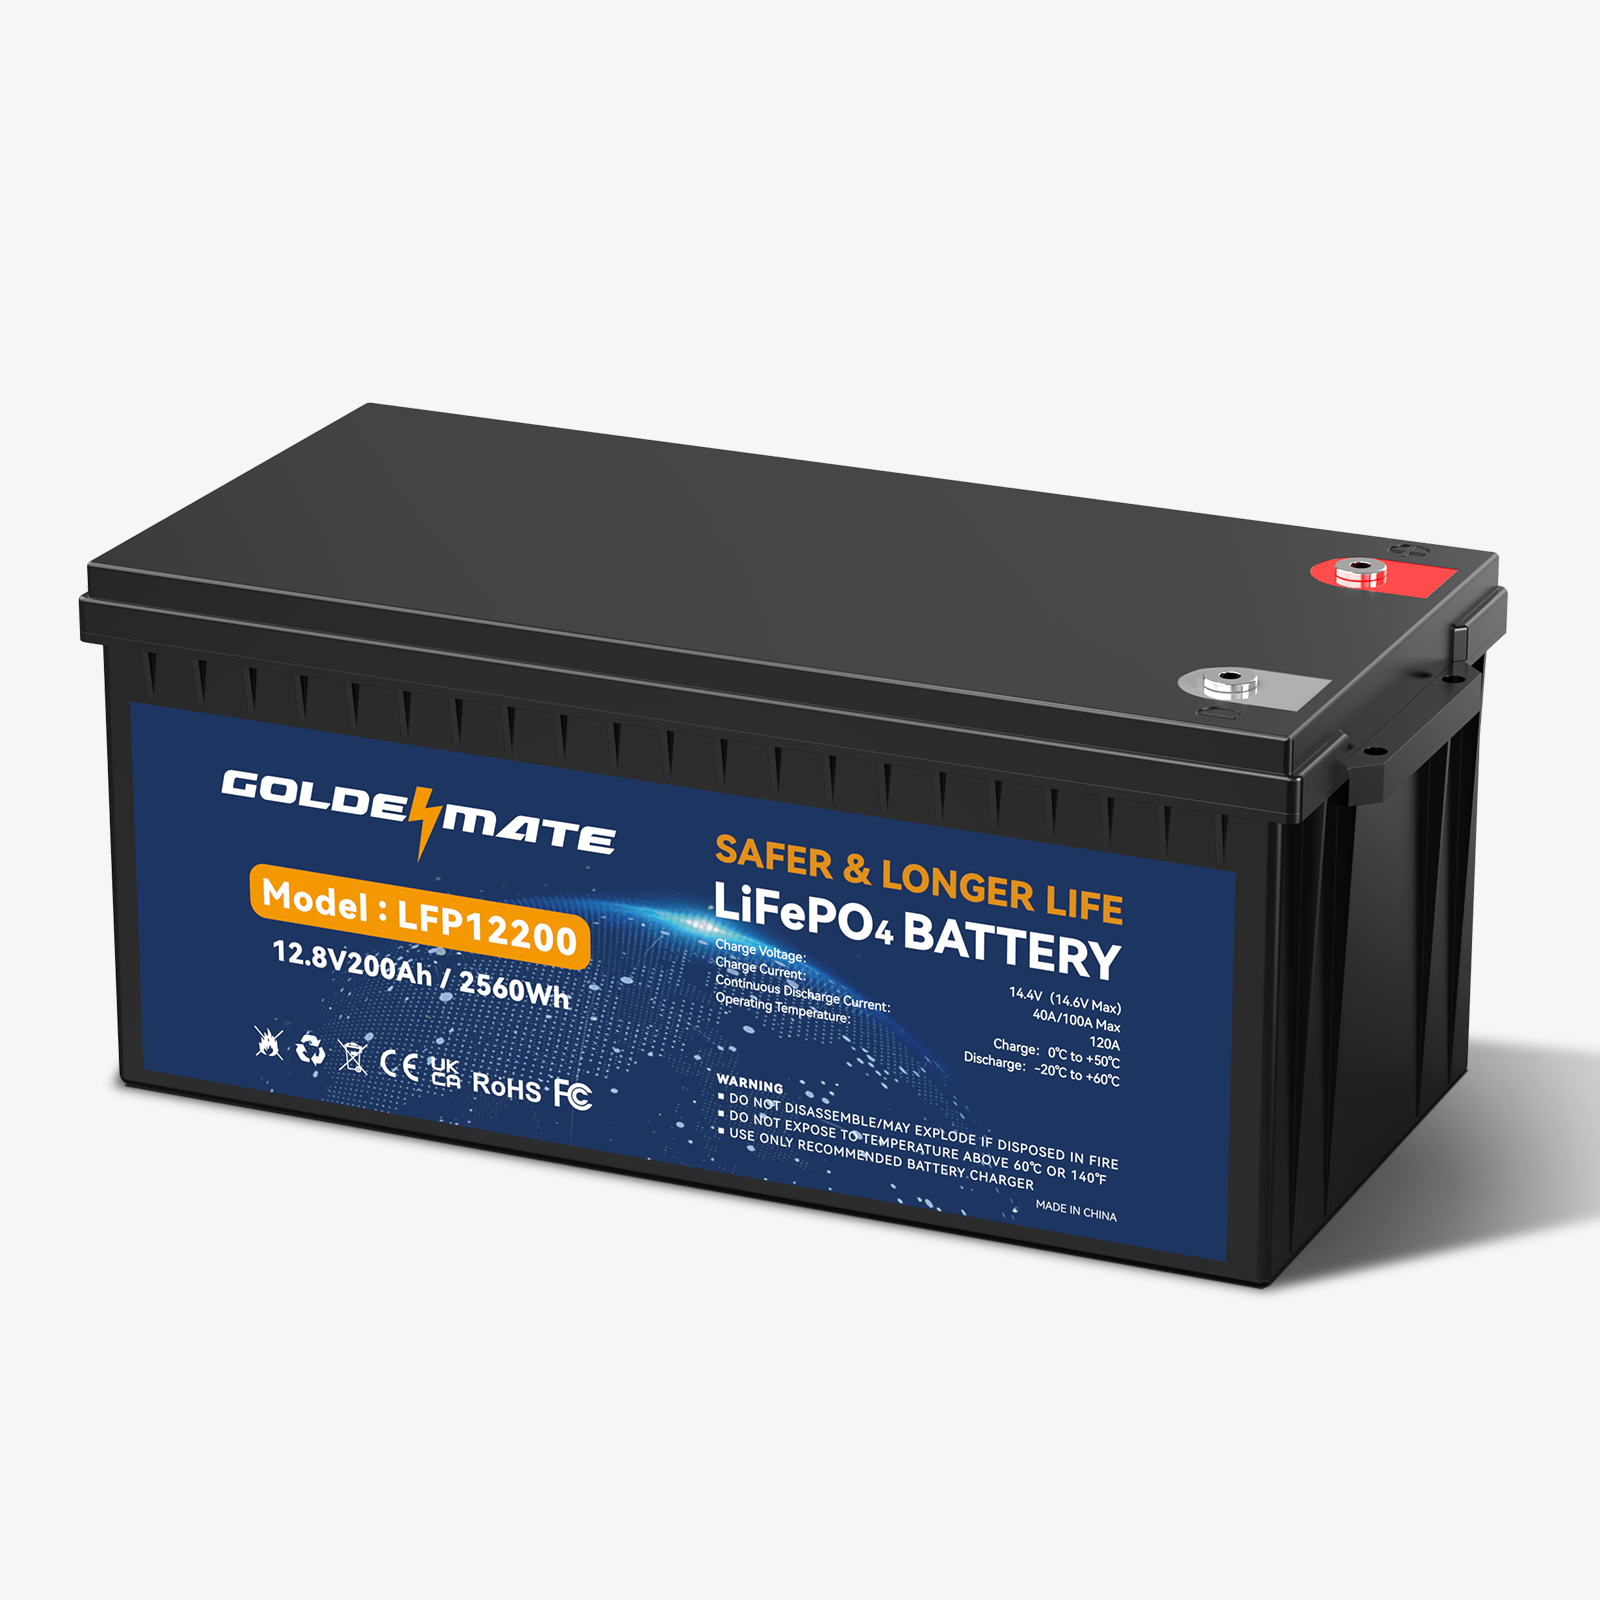 ⚡【15% Flash Sale】GoldenMate 12V 200Ah LiFePO4 Deep Cycle Lithium Battery